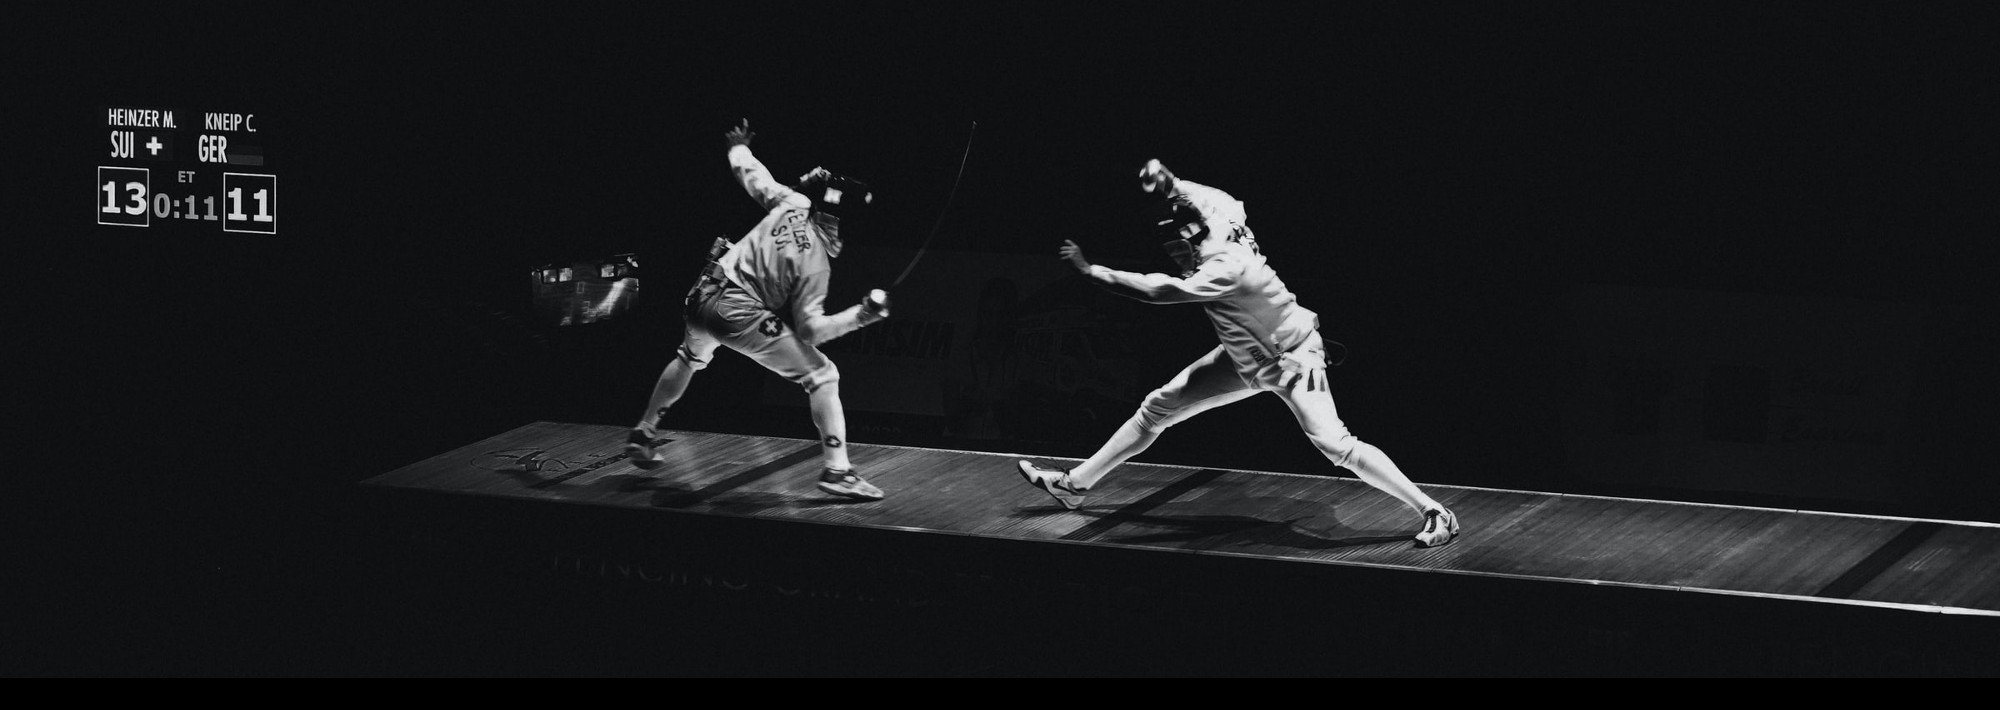 Two people in a fencing match